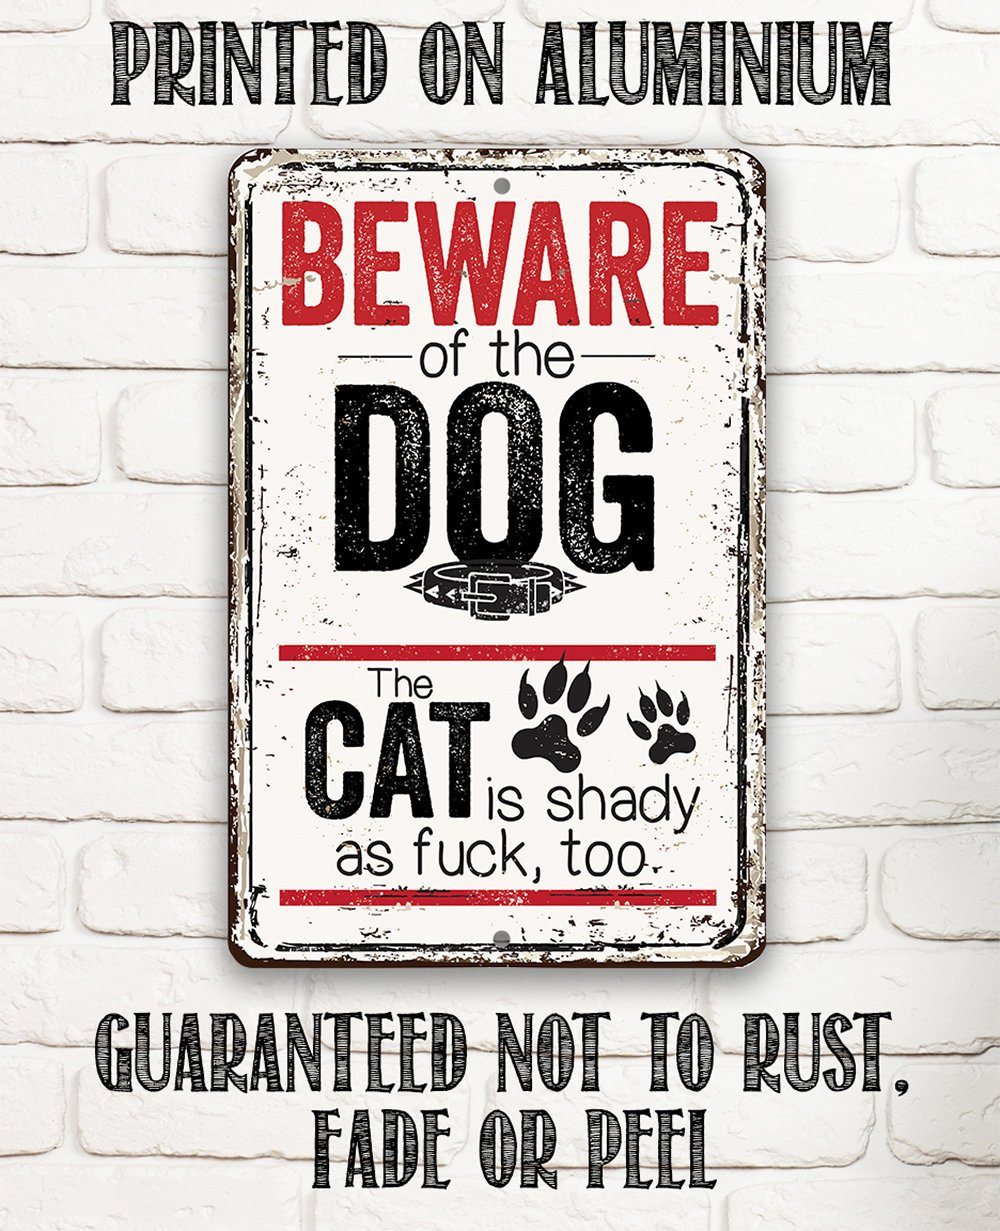 Beware of the Dog the Cat is Shady Too - Metal Sign | Lone Star Art.